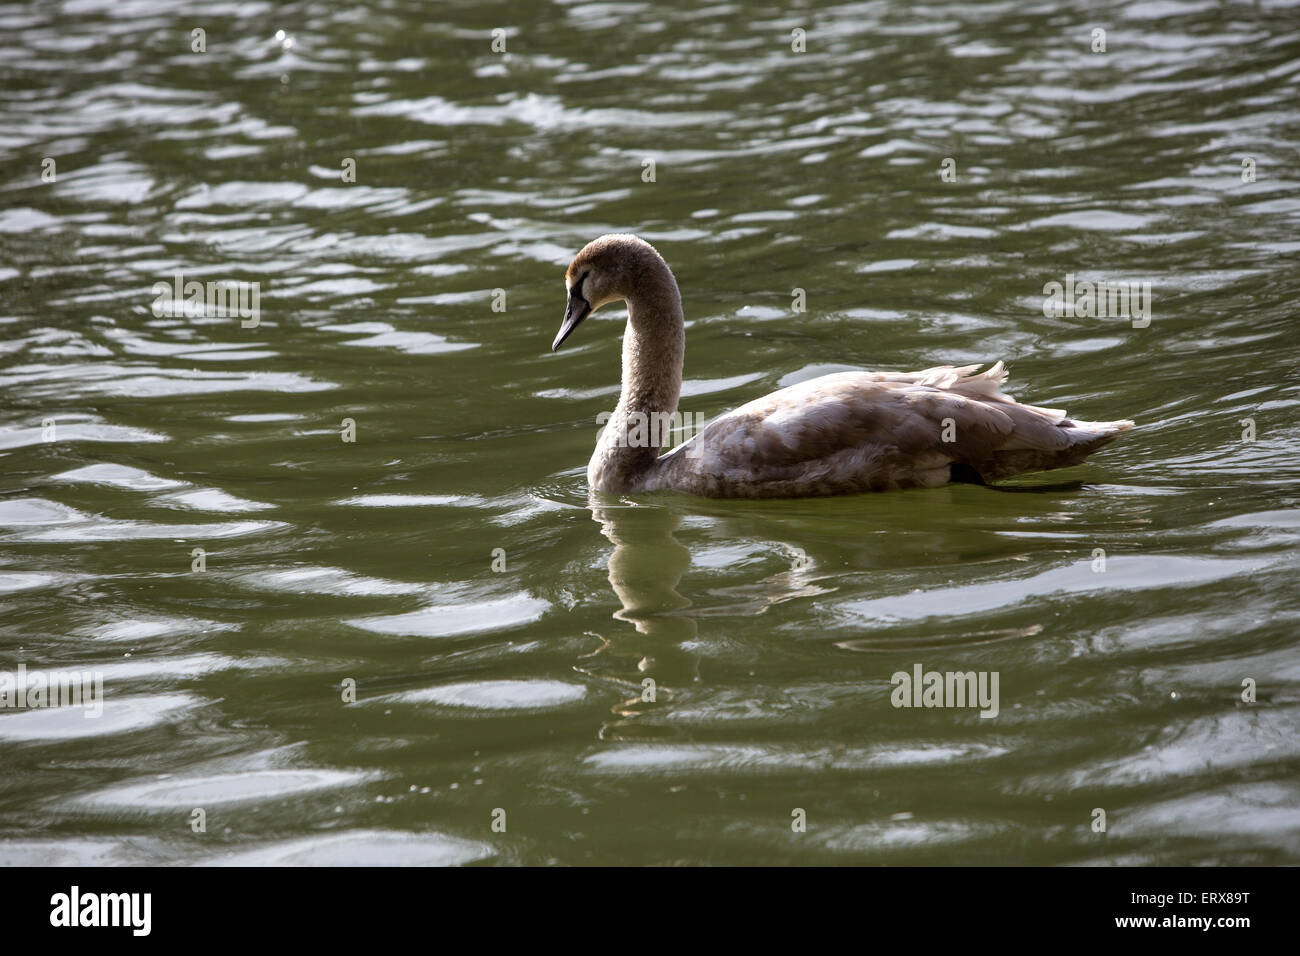 Young gray swan swimming in the lake Stock Photo